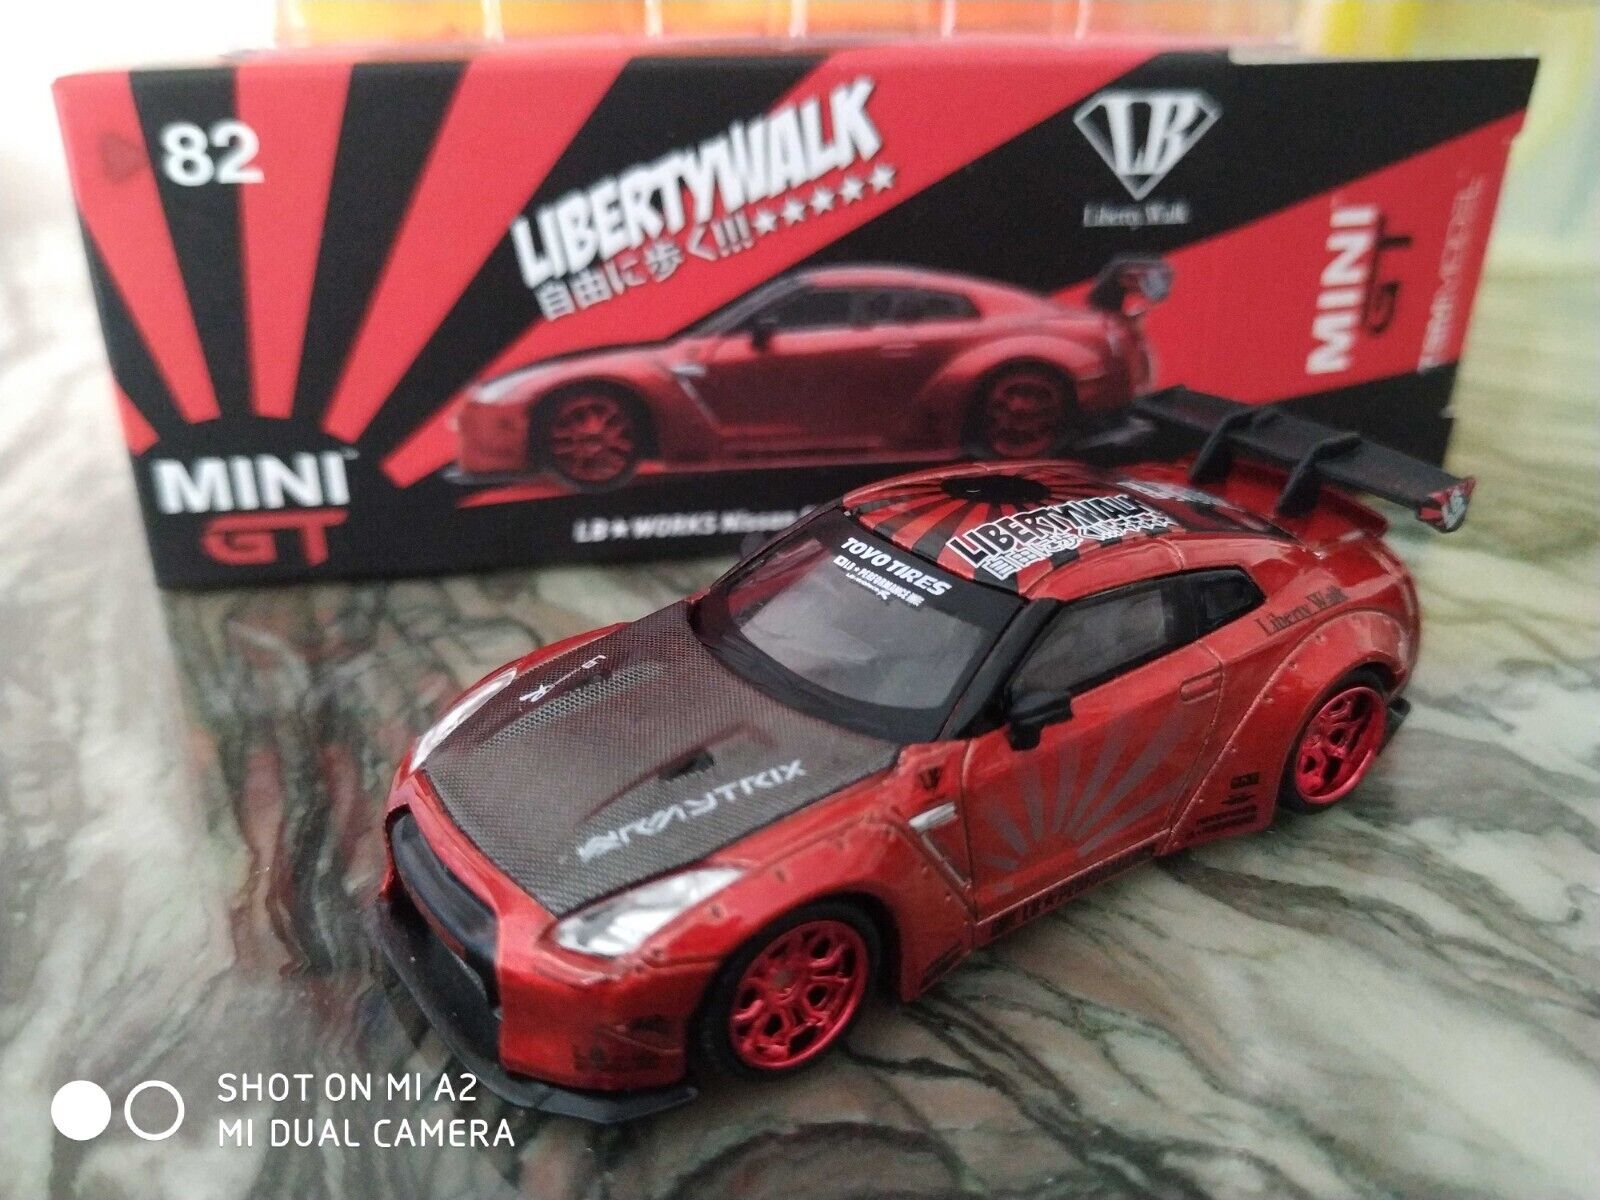 MINI GT 82 Toysrus (used) Nissan GTR R35 Candy Red Japan Liberty Walk LB  Works